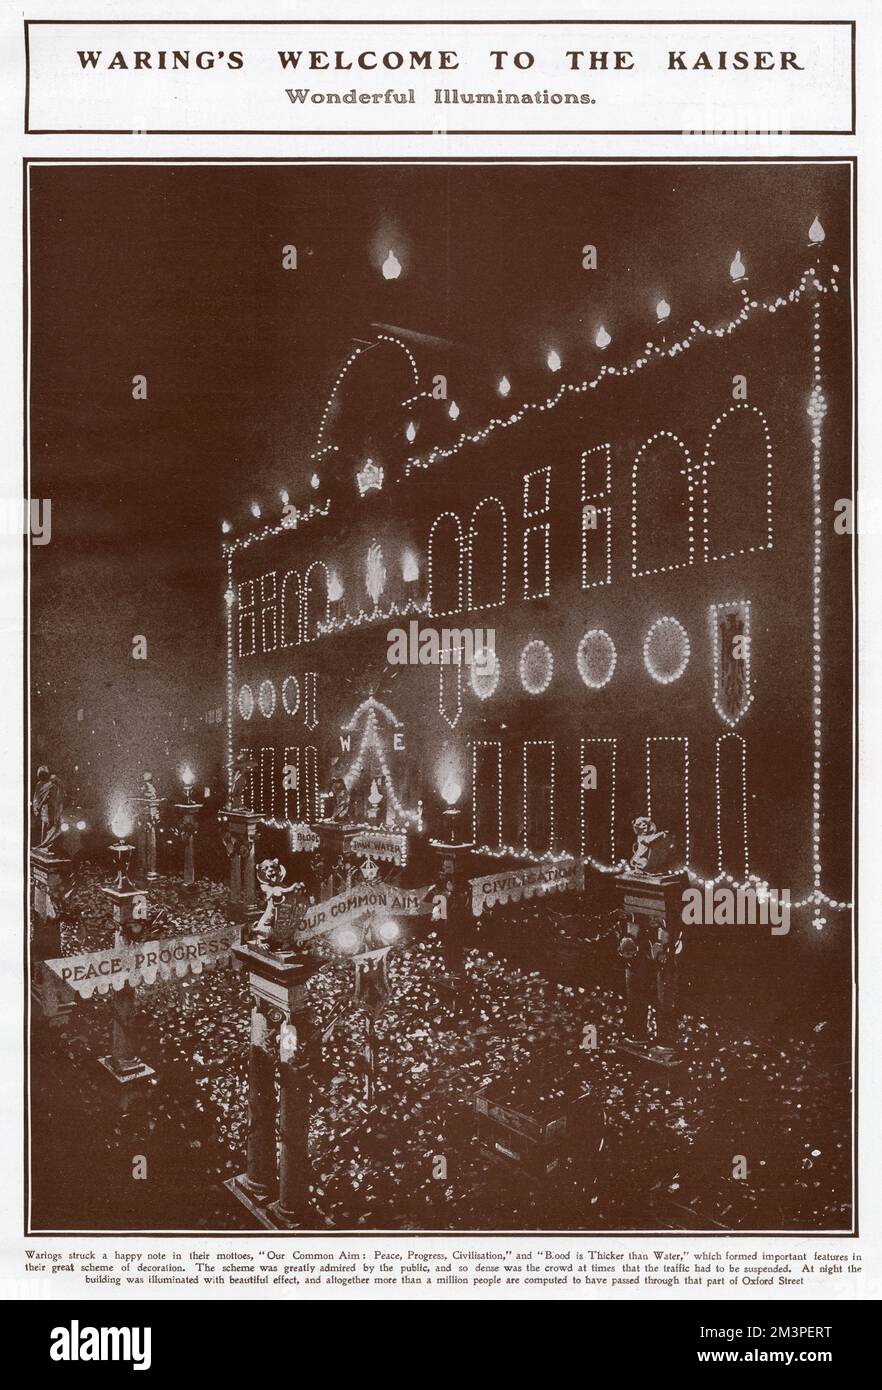 Warings shop in Oxford Street, London decorated the front of their with bright lights with mottoes staying 'Our Common Aim: Peace, Progress, Civilisations' and 'Blood id Thicker than Water,' with millions of people passing through. Stock Photo